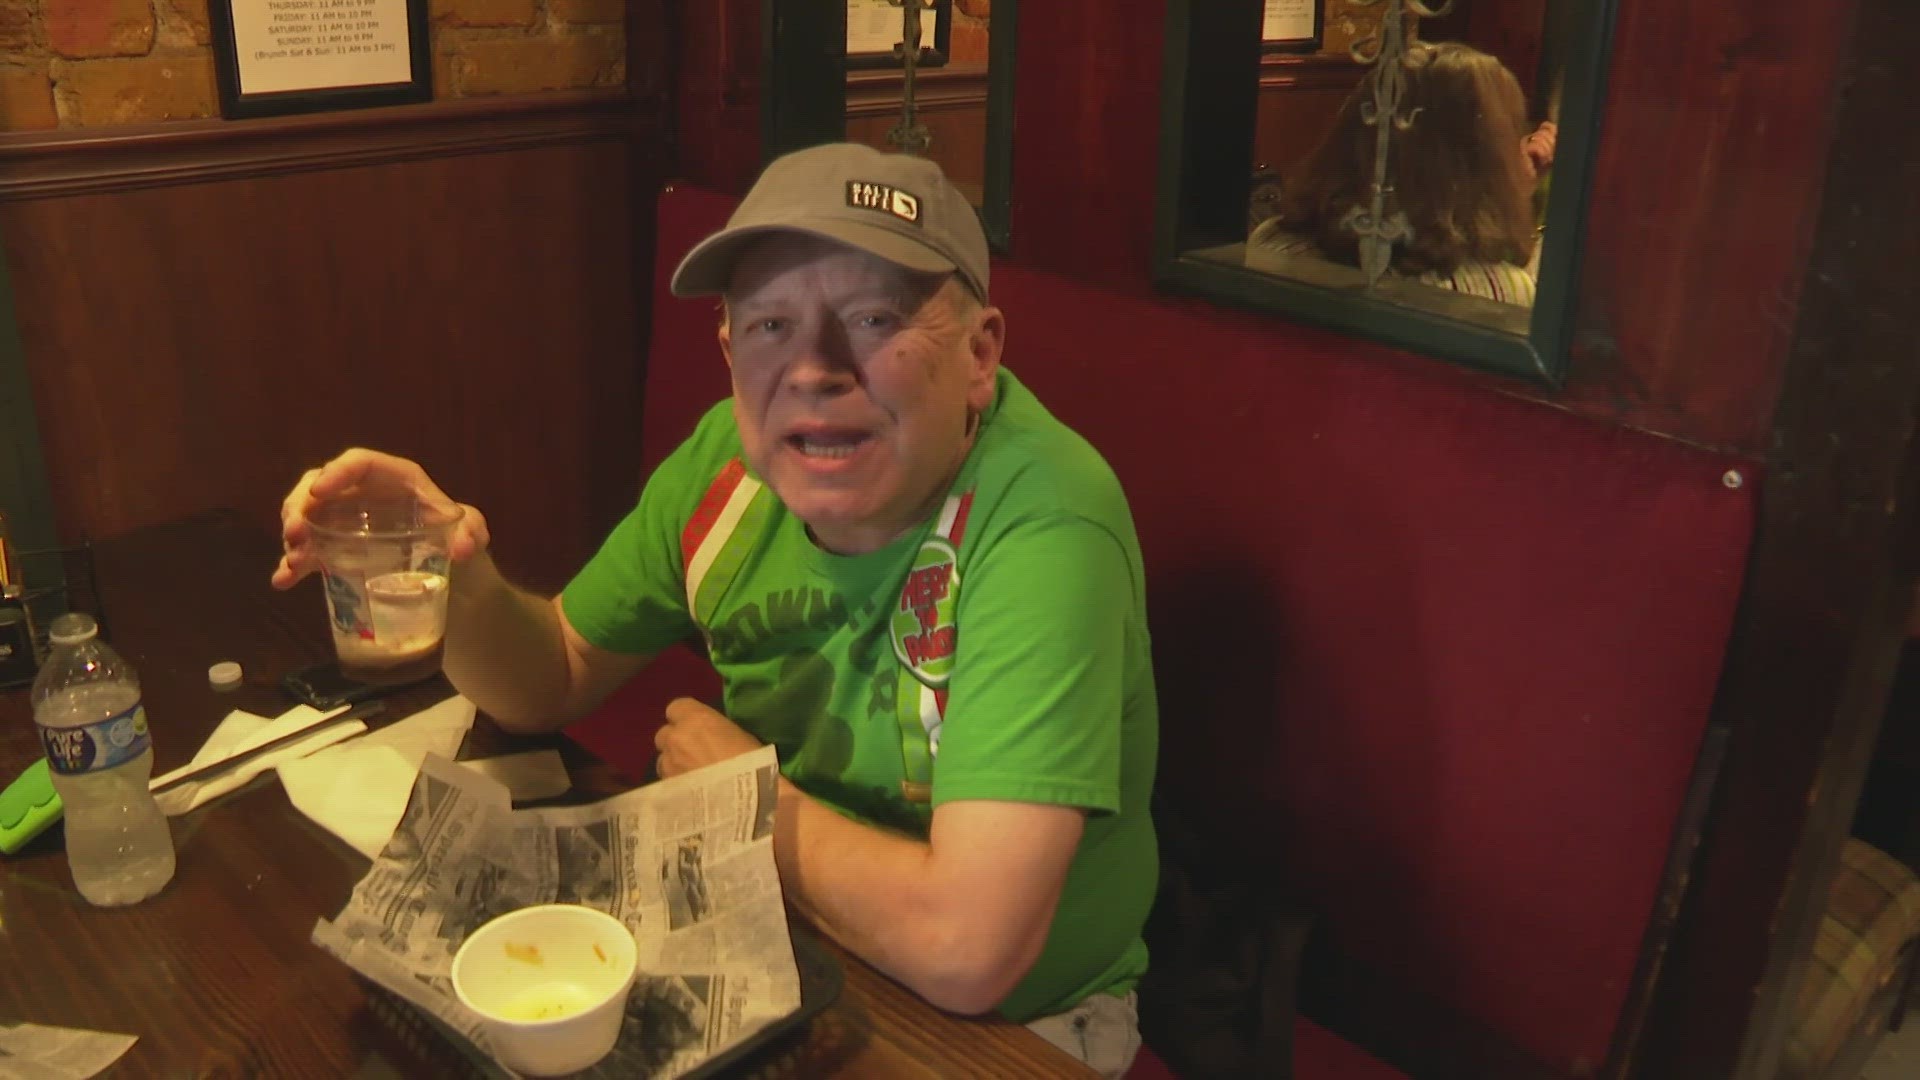 Bar-hoppers celebrated St. Patrick’s Day and March Madness at M’Coul’s Public House in downtown Greensboro.